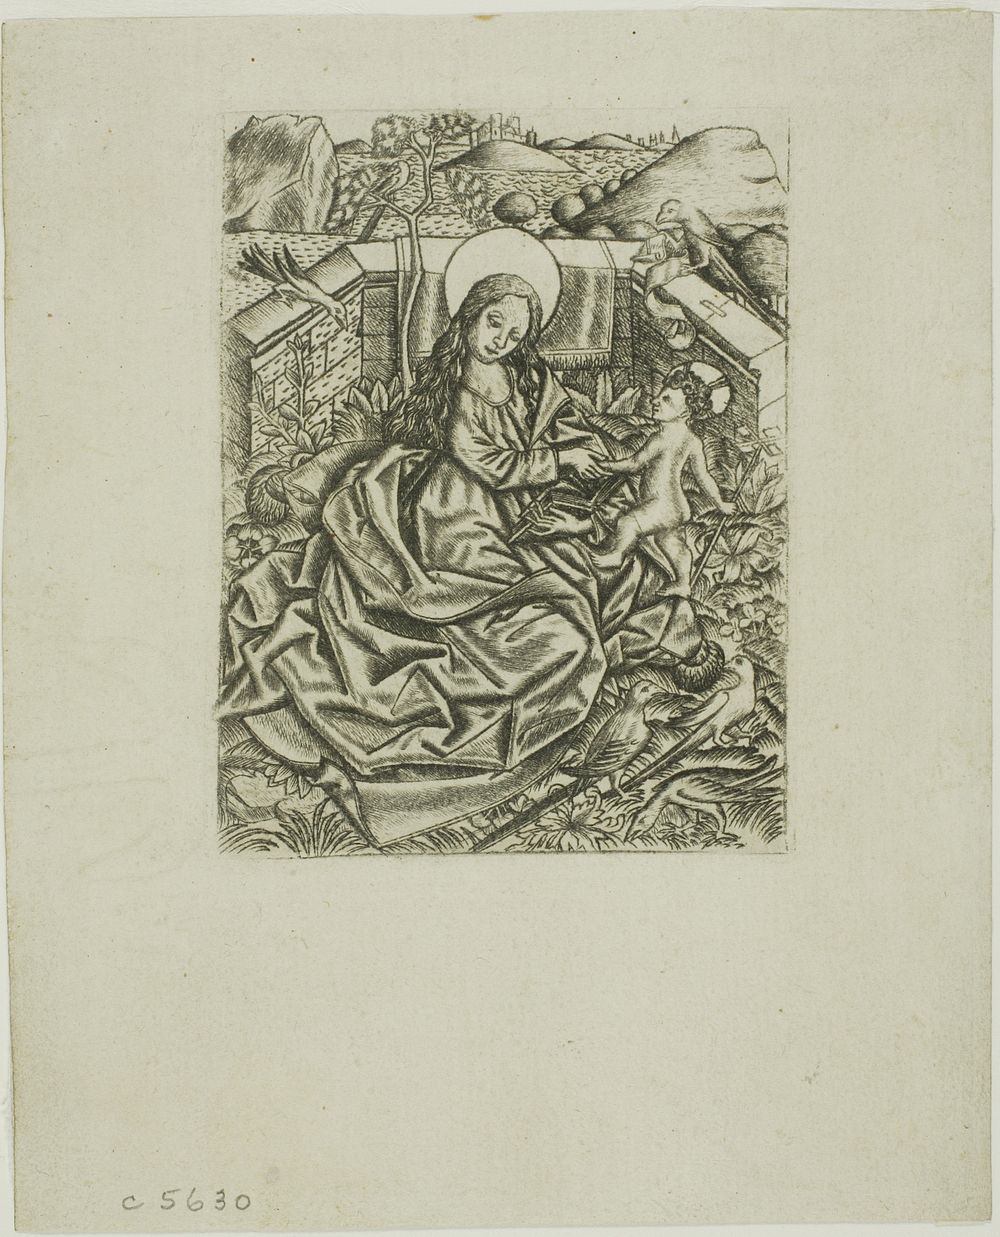 The Virgin and Child in the Garden by Israhel van Meckenem, the younger